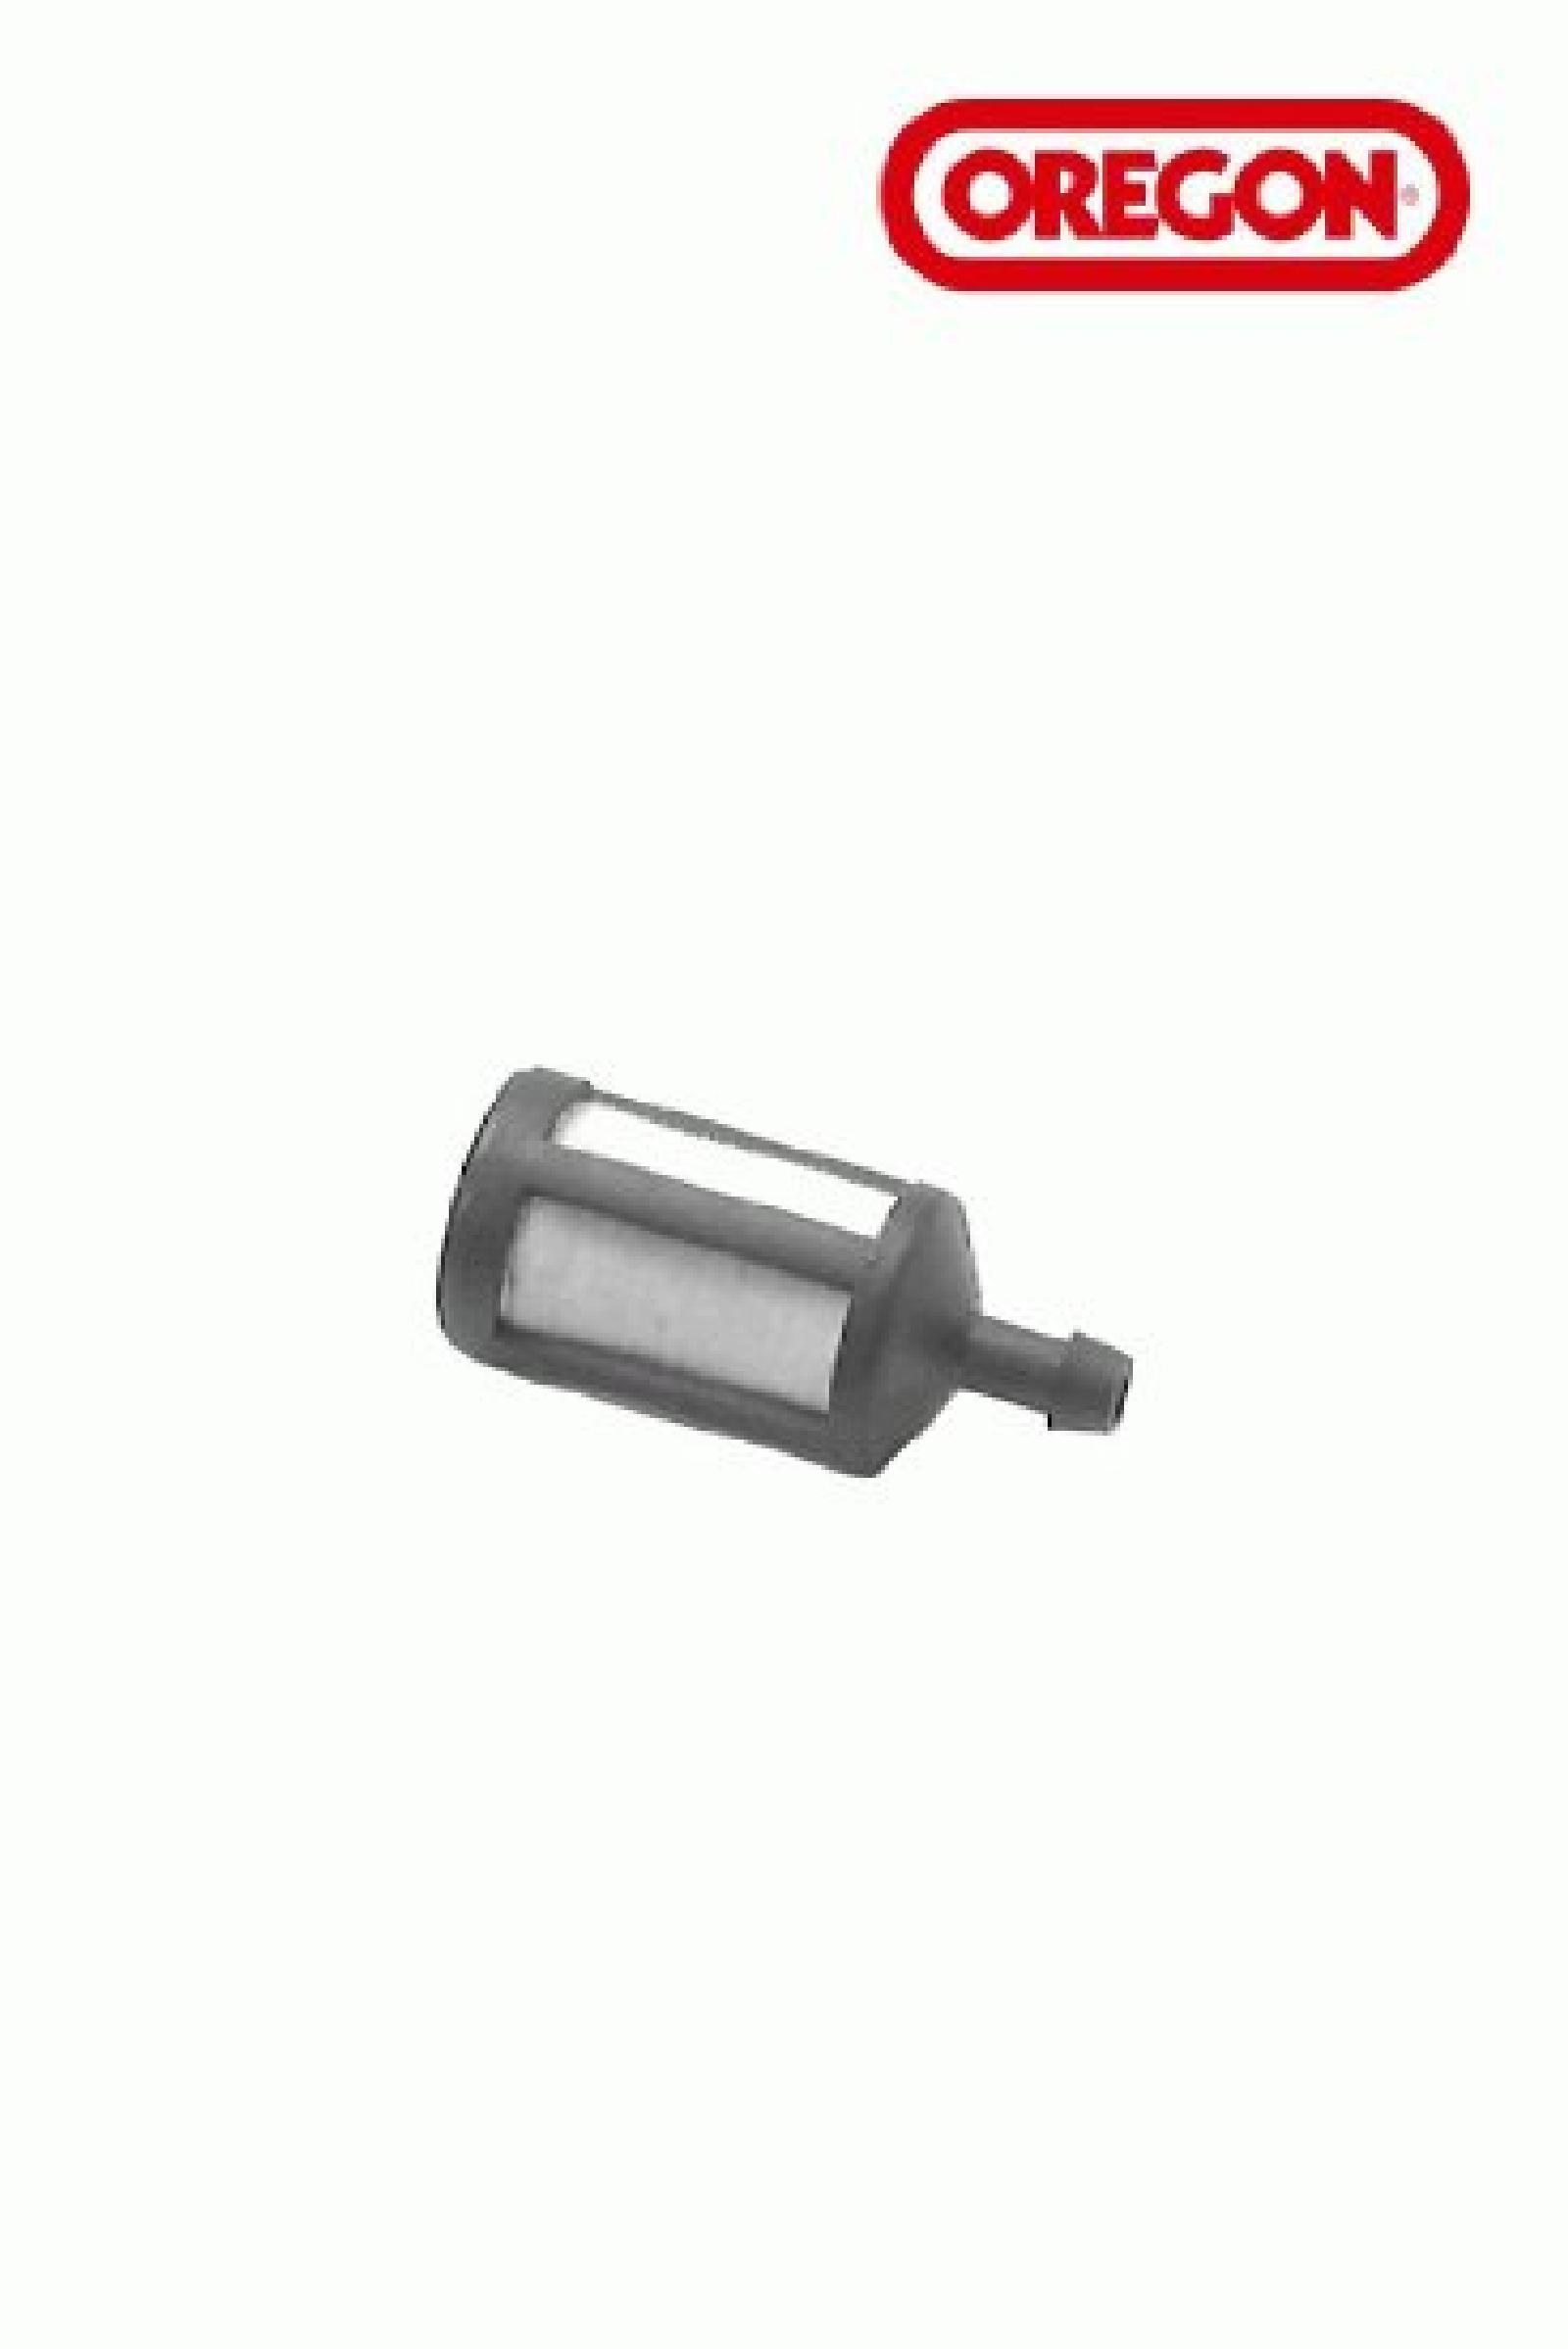 FUEL FILTER 3/16IN 175 MC part# 07-210 by Oregon